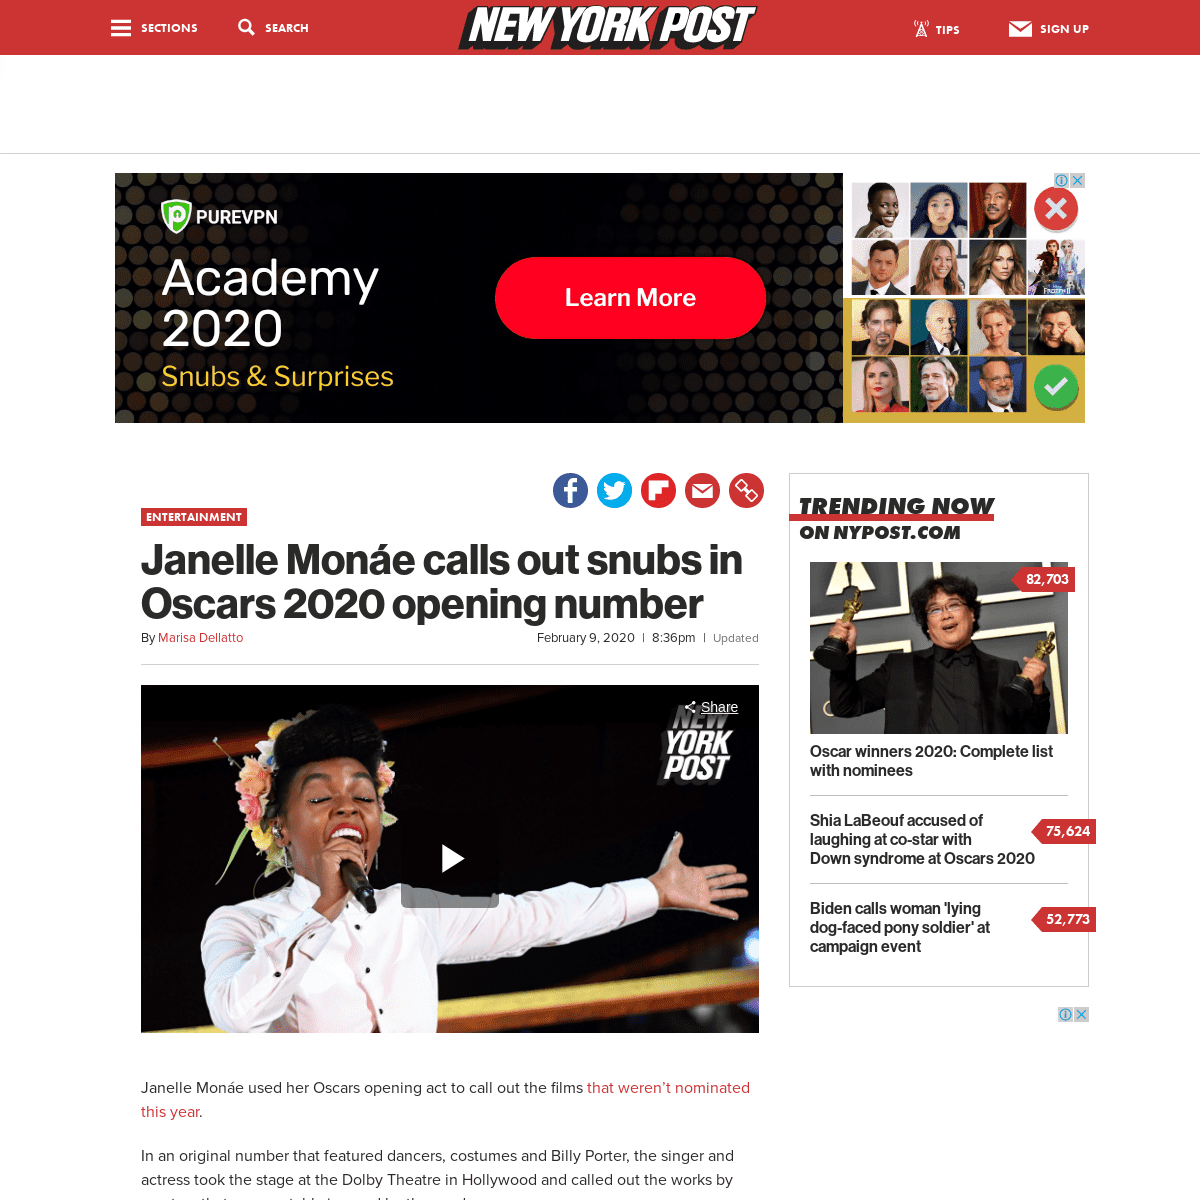 A complete backup of nypost.com/2020/02/09/janelle-monae-calls-out-snubs-in-oscars-2020-opening-number/